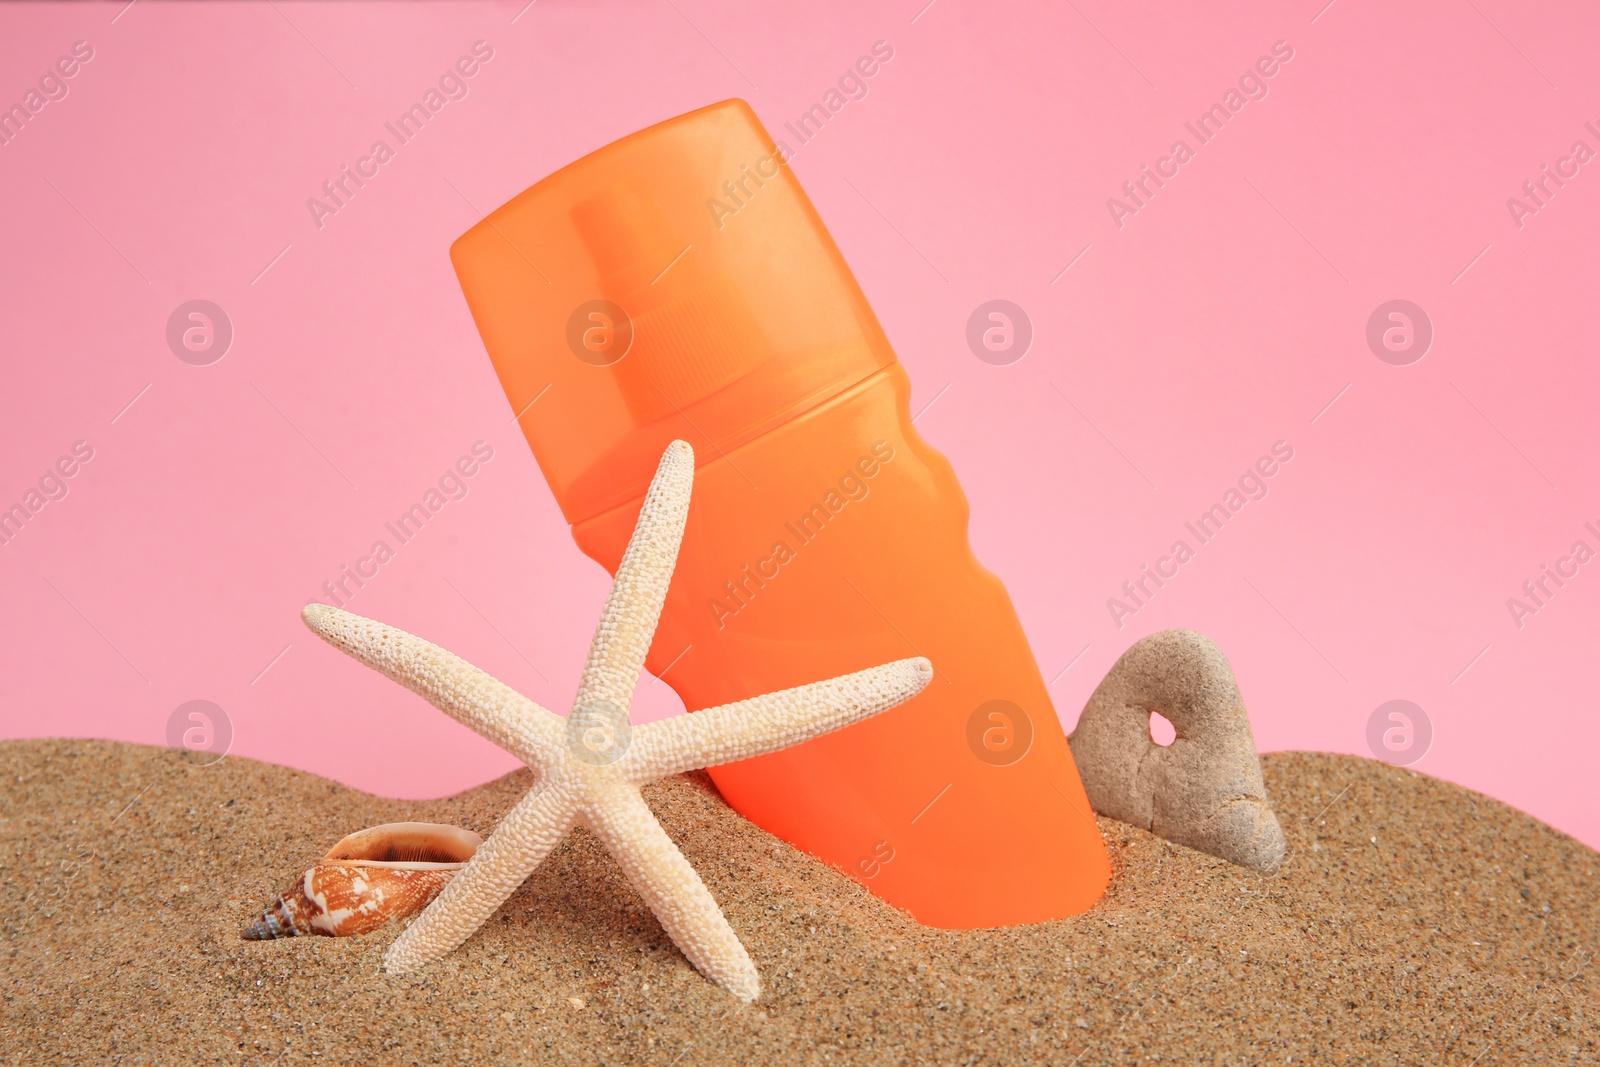 Photo of Sand with sunscreen, starfish, stone and seashell against pink background. Sun protection care